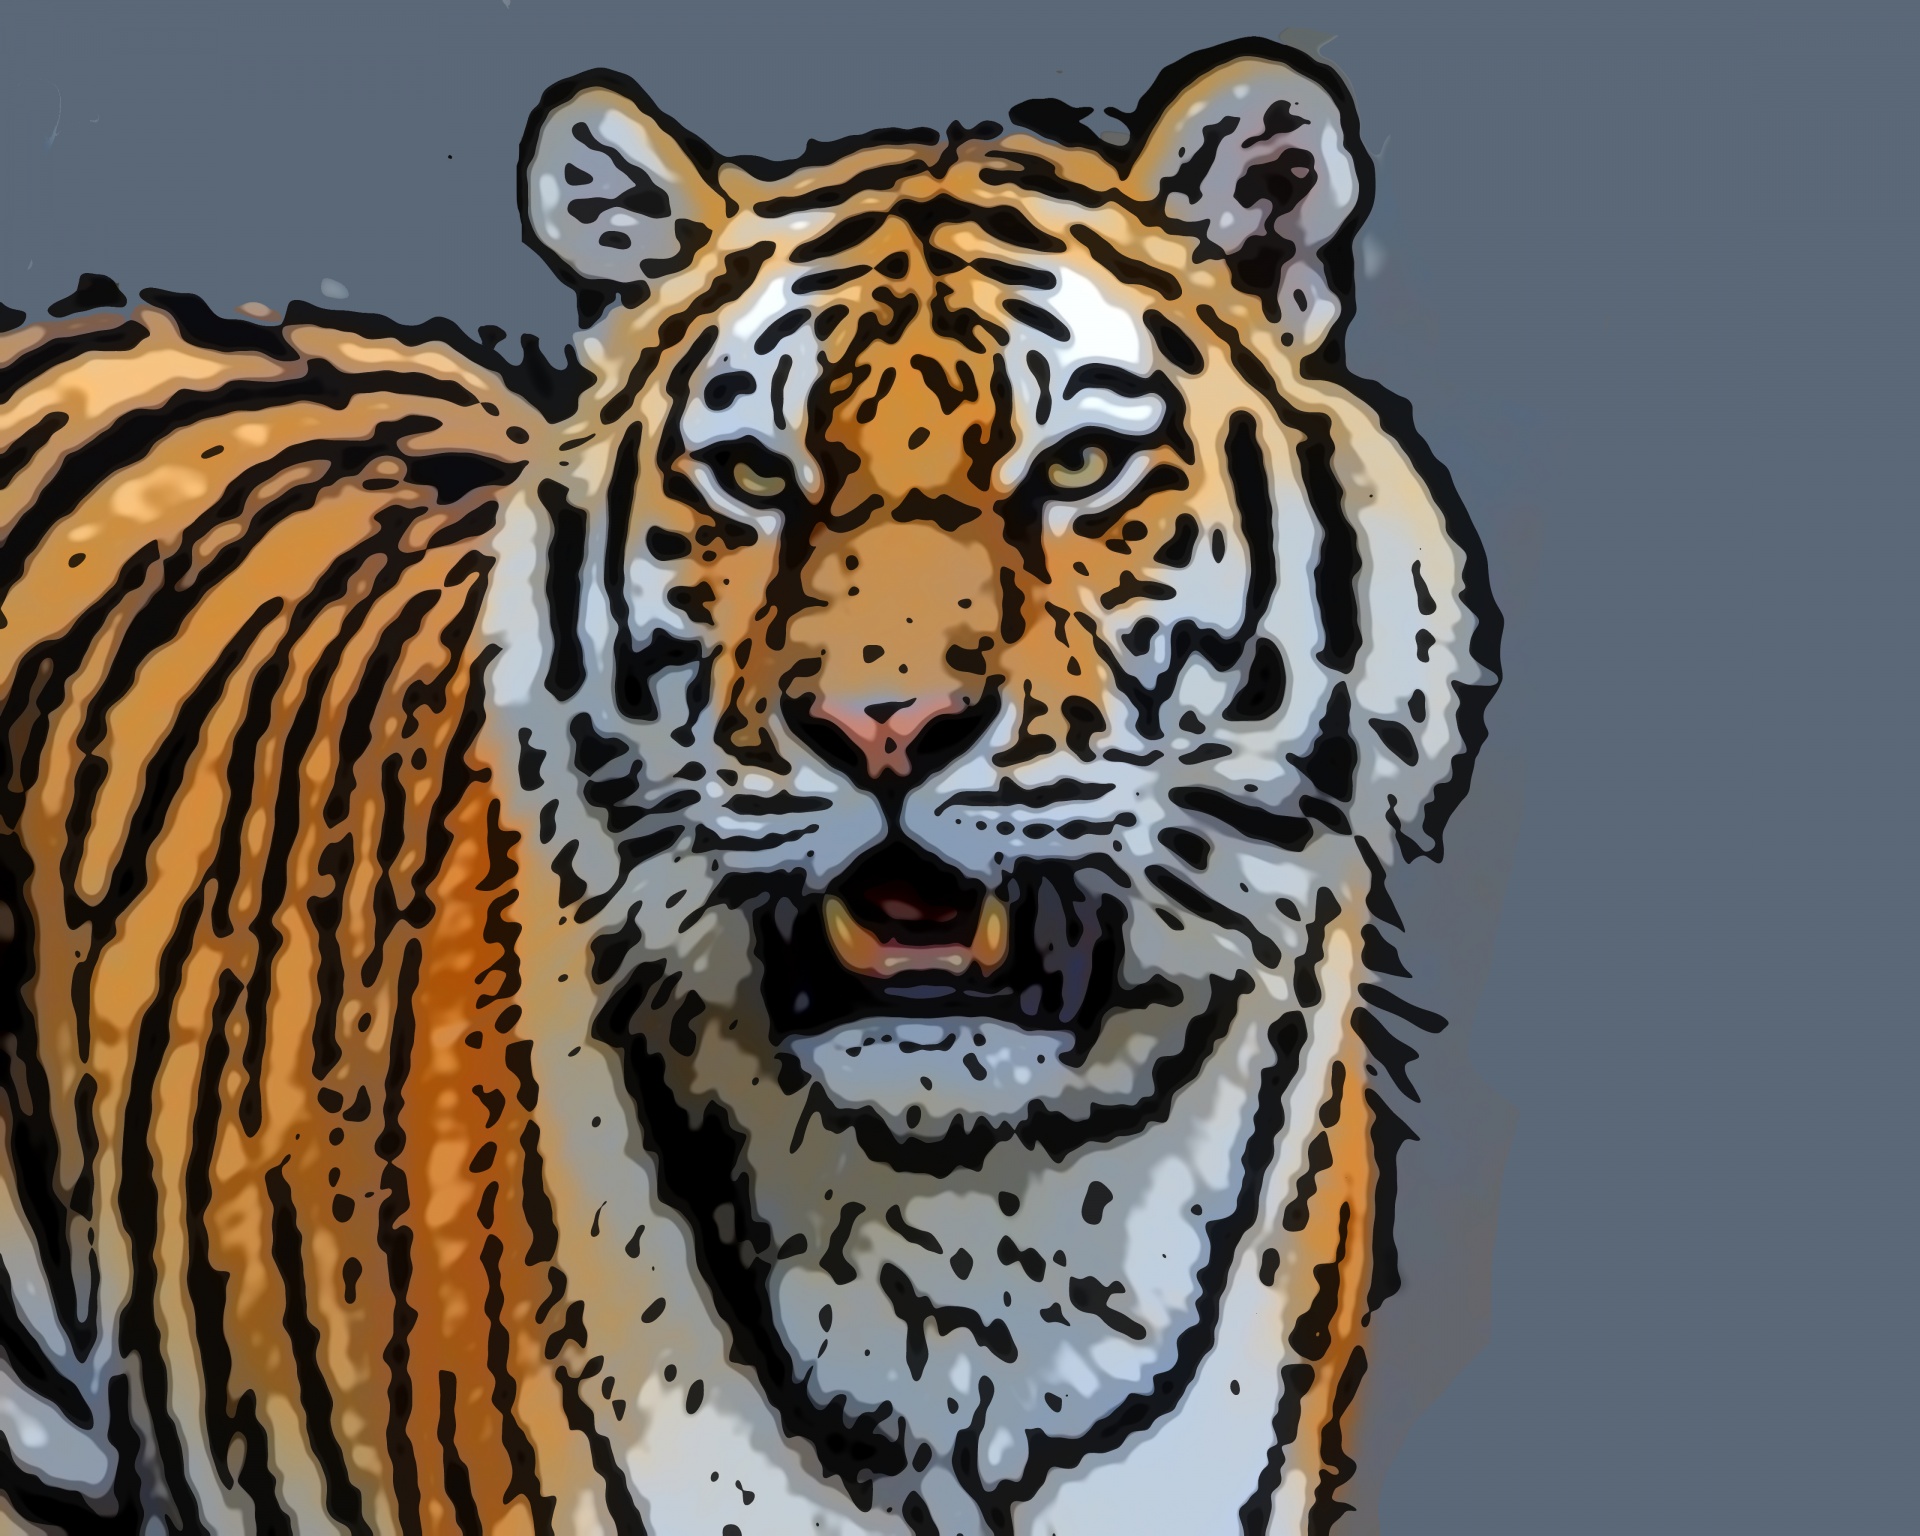 Tiger face image with a cartoonized affect